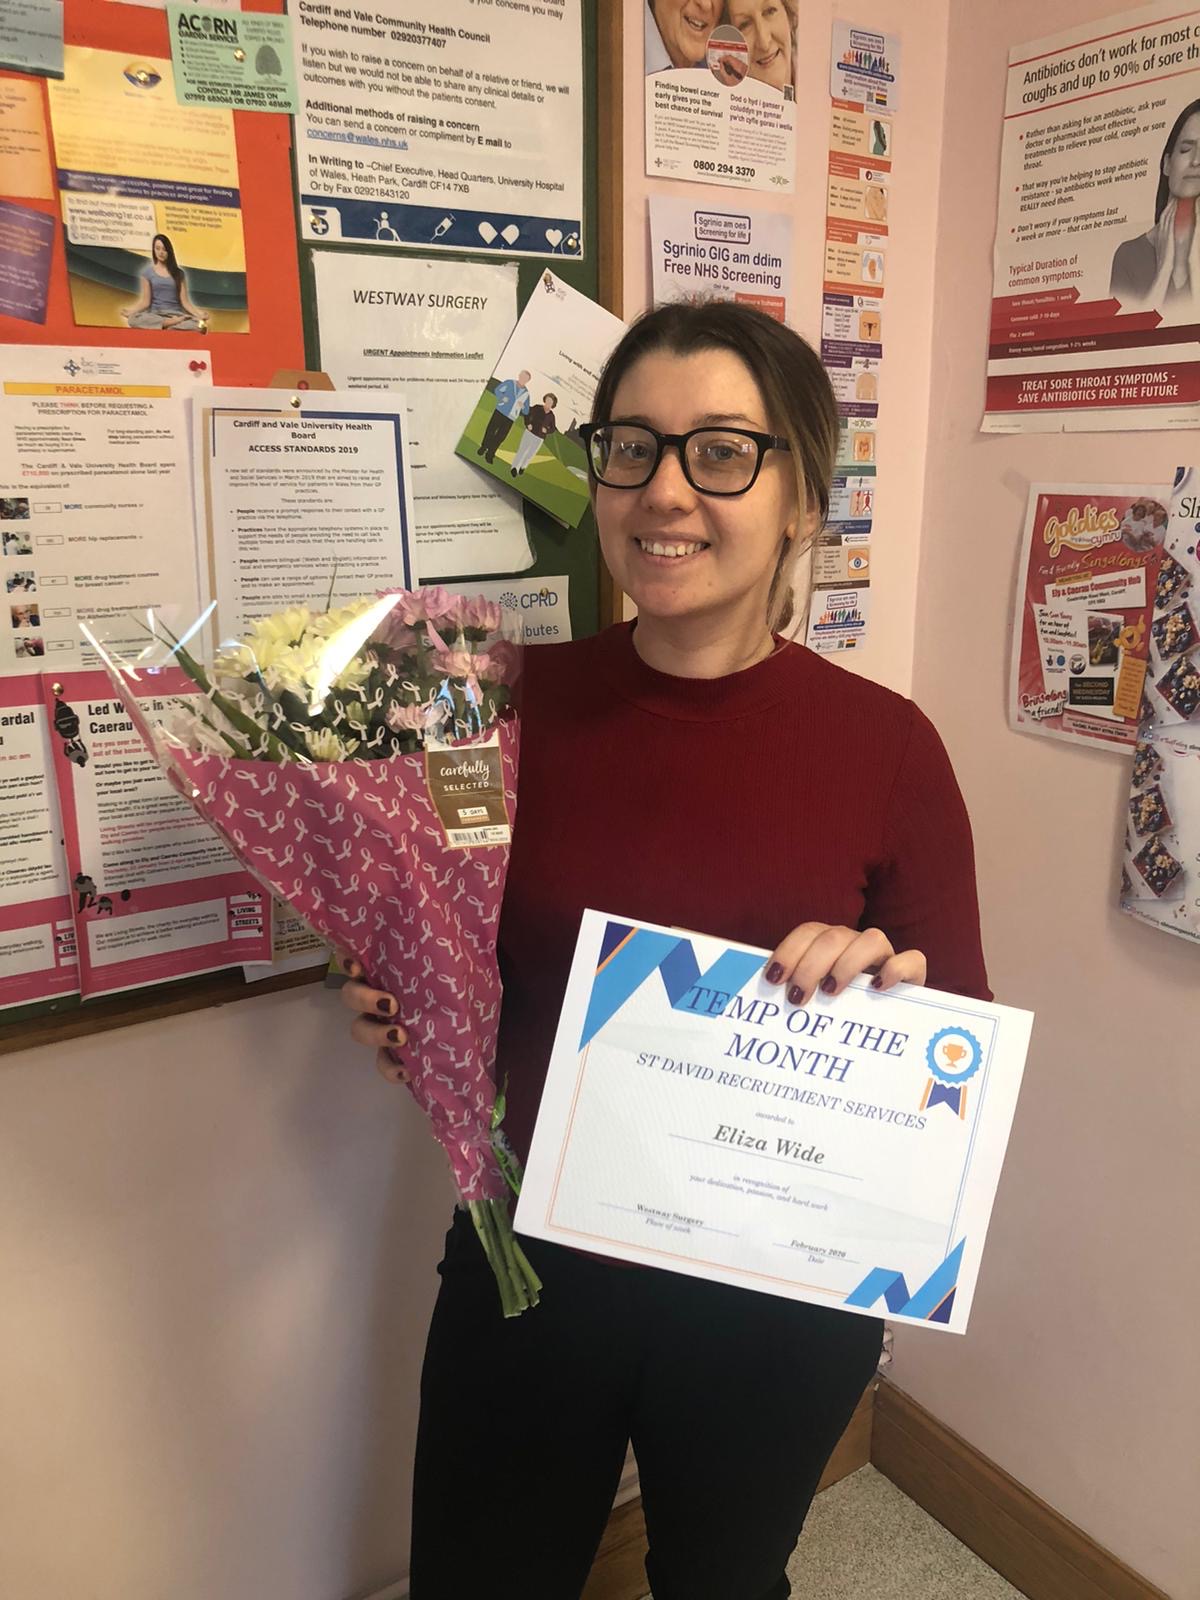 Temp of the Month - February 2020